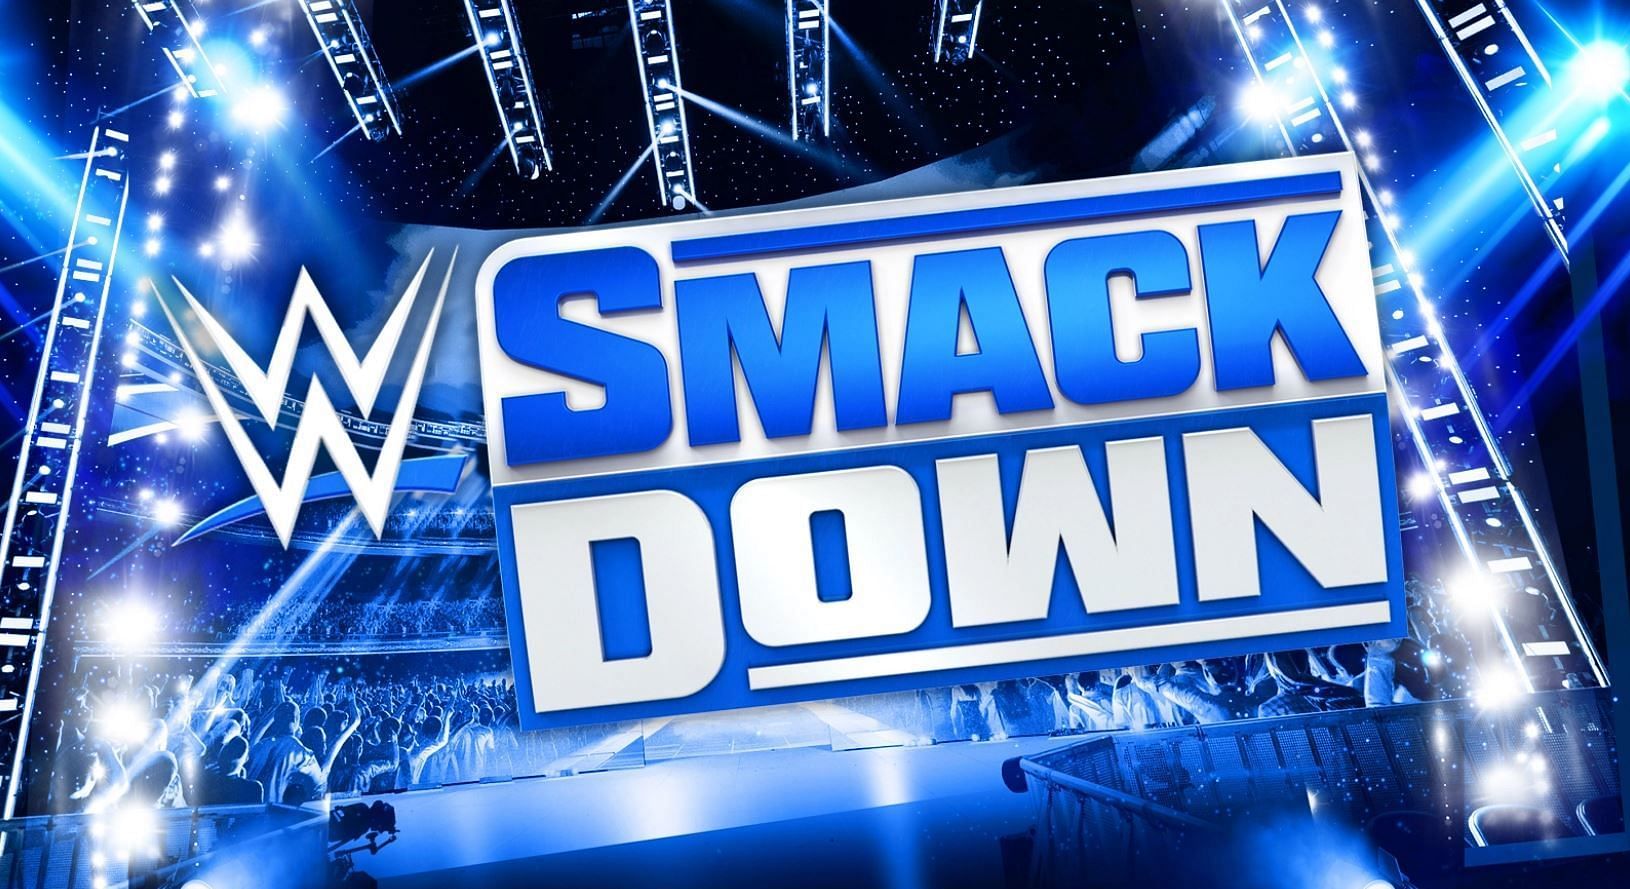 34-year-old WWE Superstar ends 11-month streak this week on SmackDown